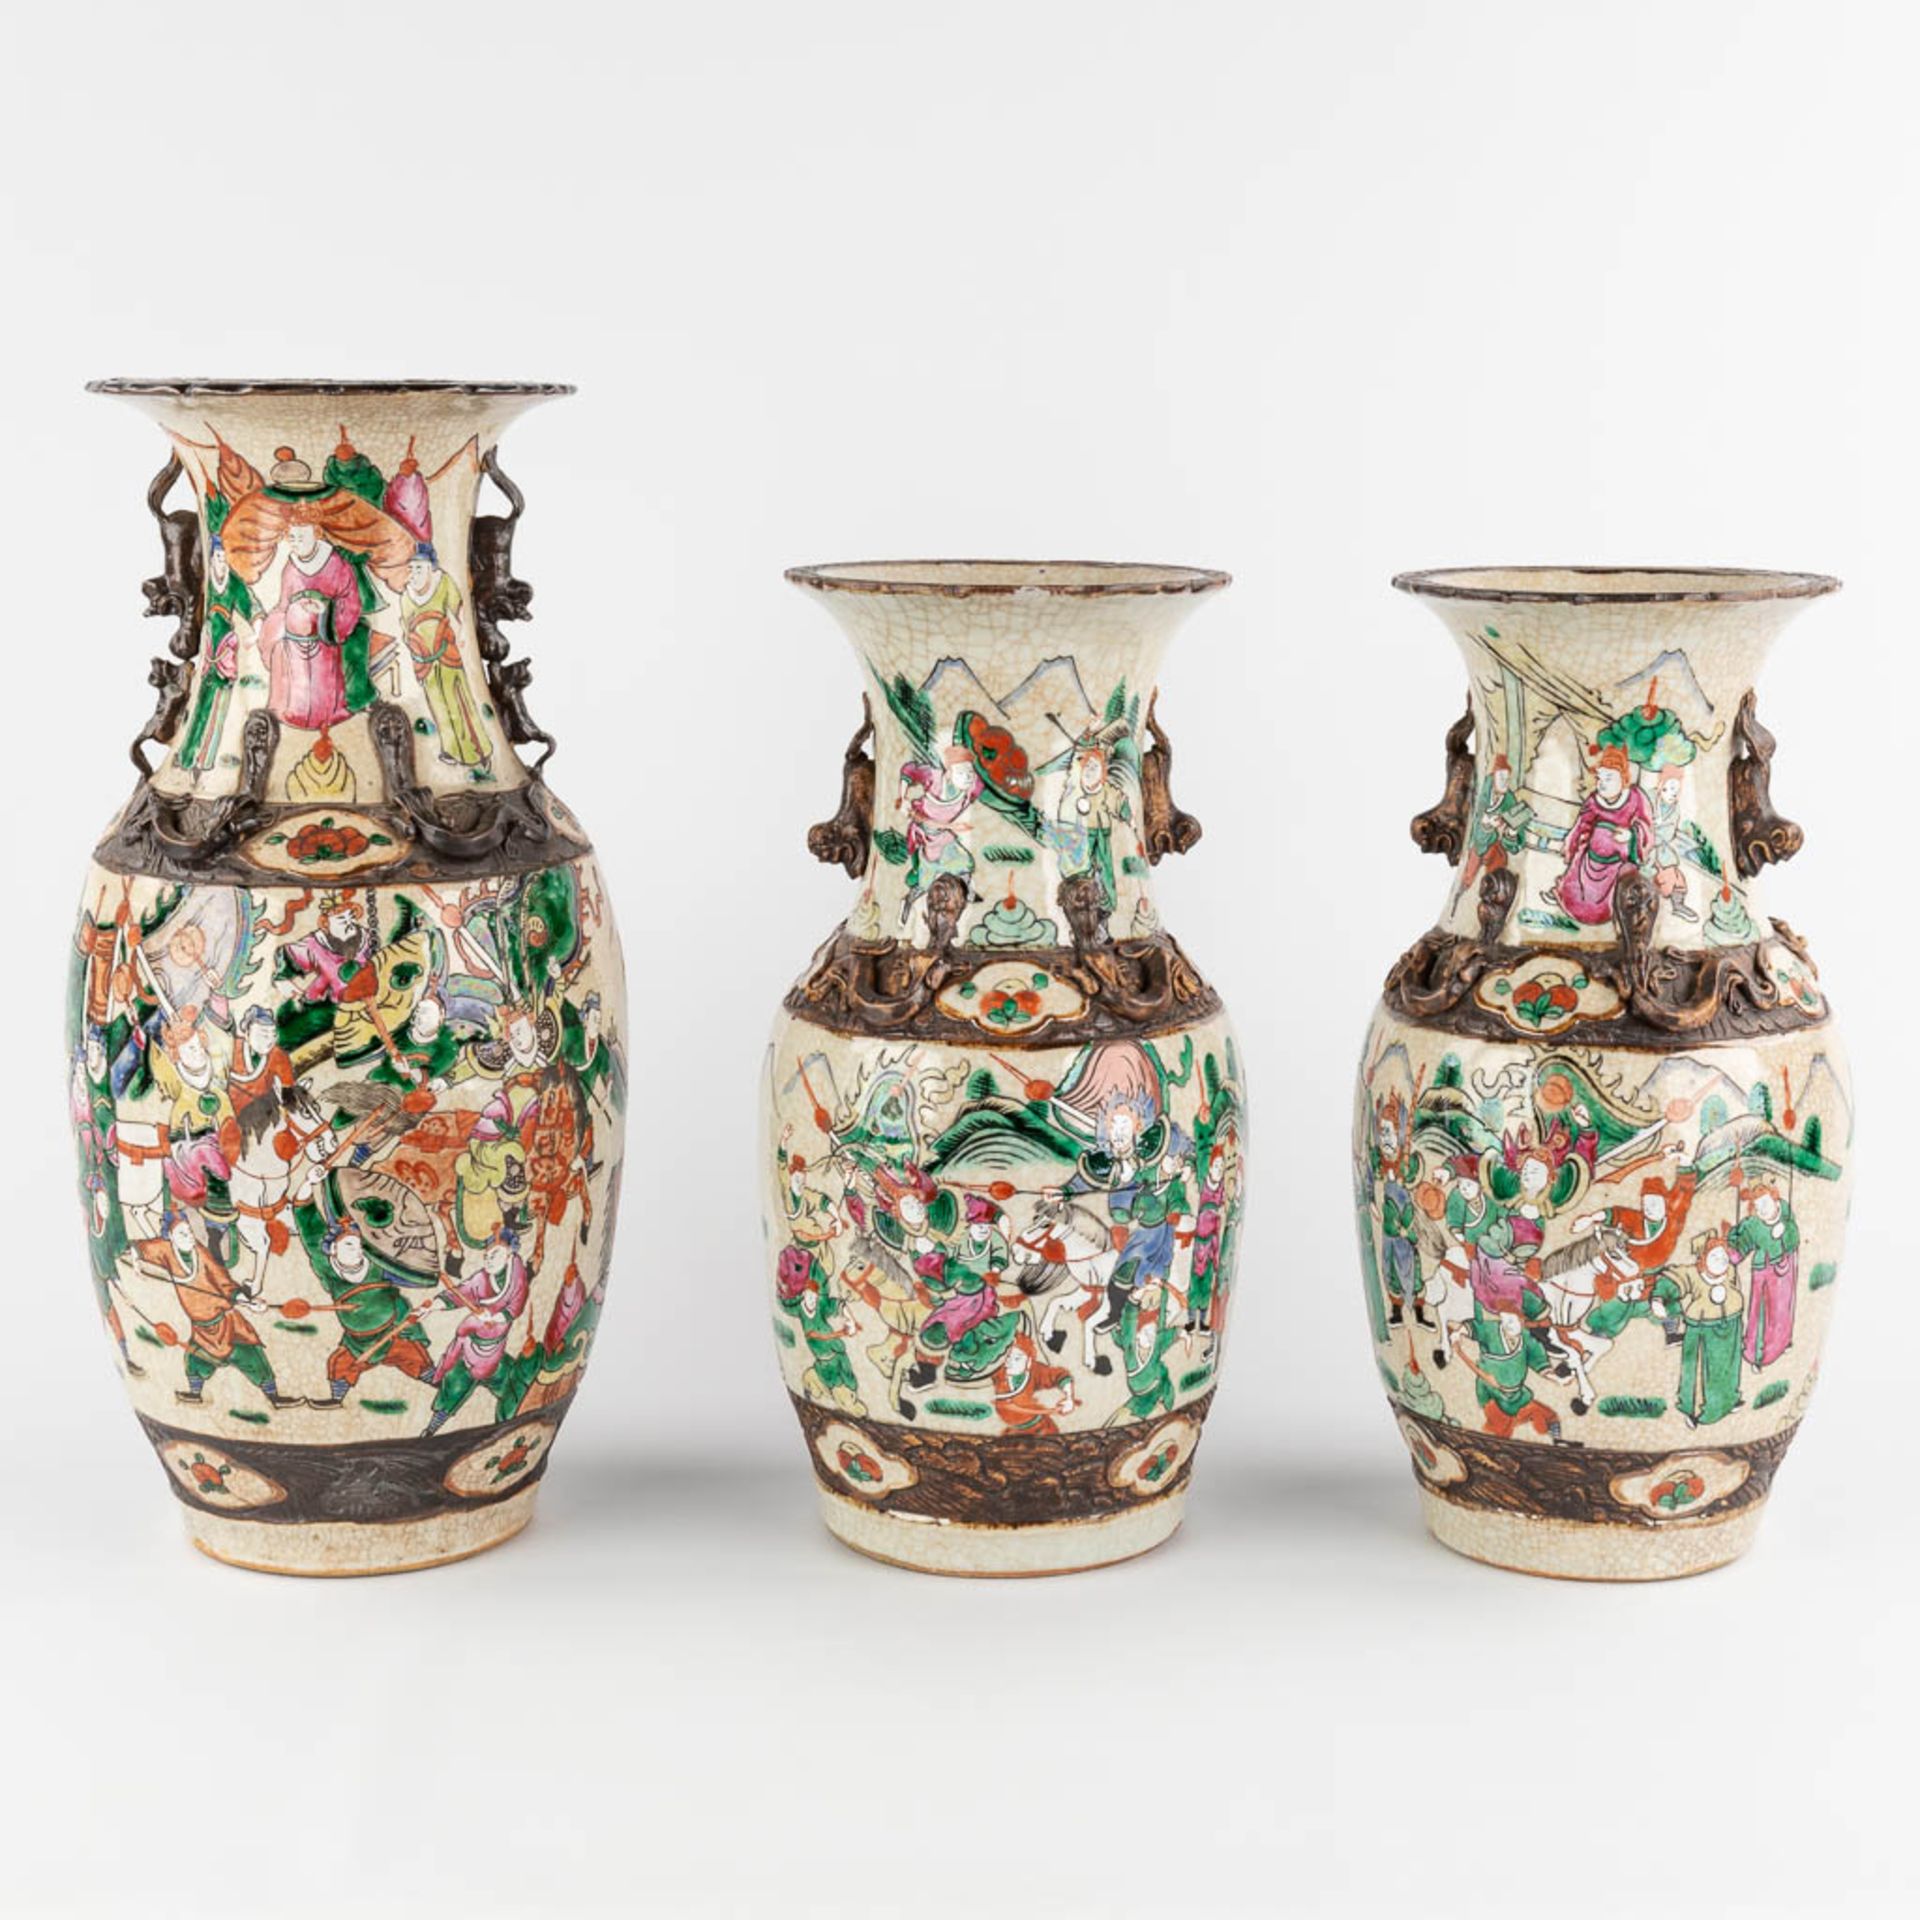 Three Chinese vases decorated with warriors, Nanking. 20th C. (H:43 x D:20 cm)